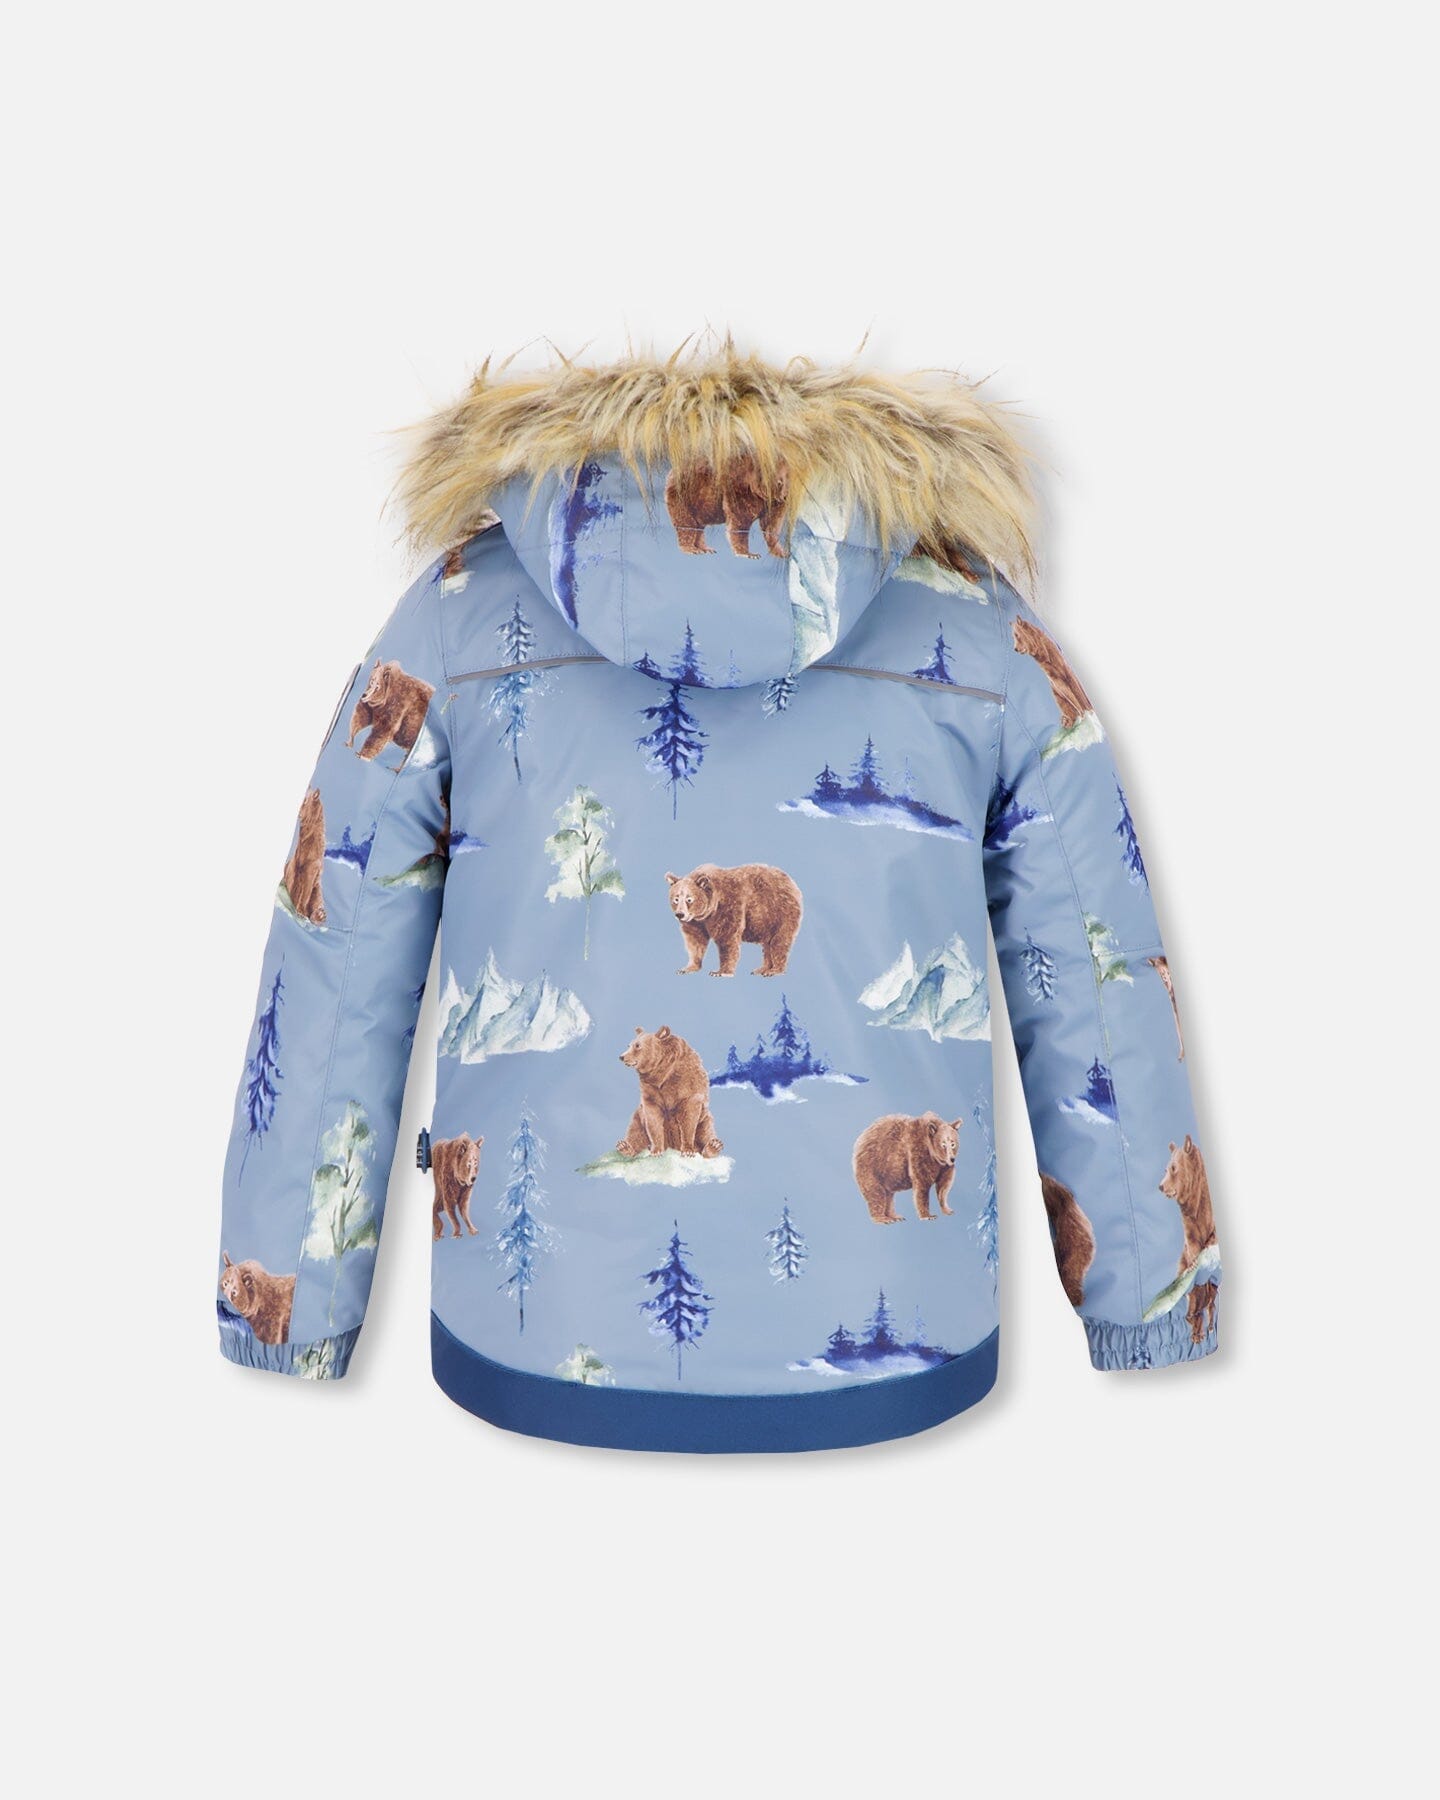 Two Piece Snowsuit Teal Blue With Bear Print - F10Q808_868